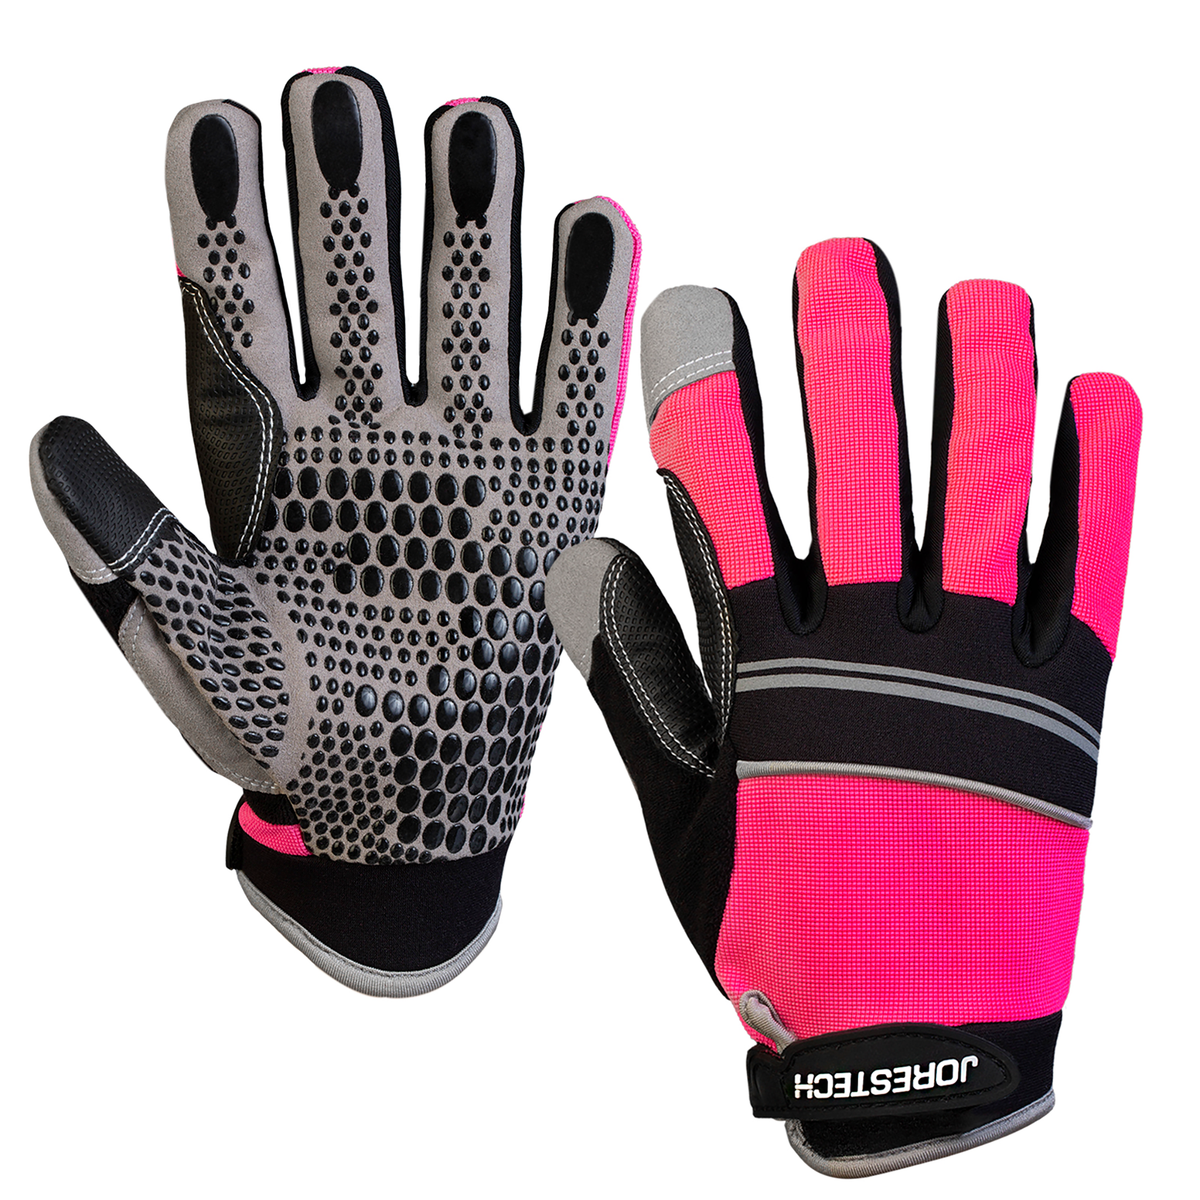 Safety Work Gloves with Silicone Dot Anti-Slip Palms | Technopack Safety & PPE M / Pink by JORESTECH